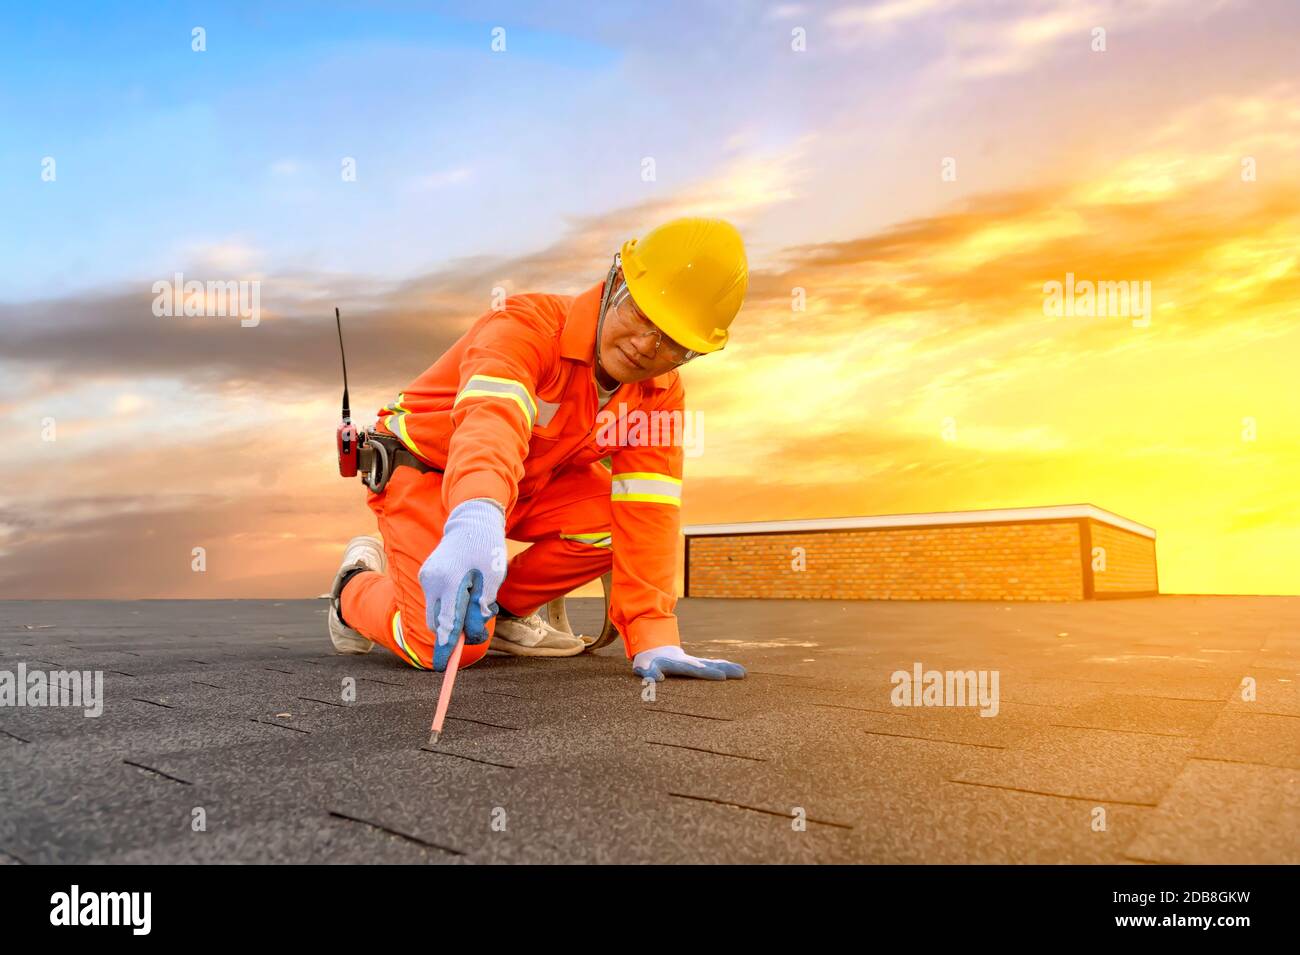 Engineer working on a roof, Thailand Stock Photo